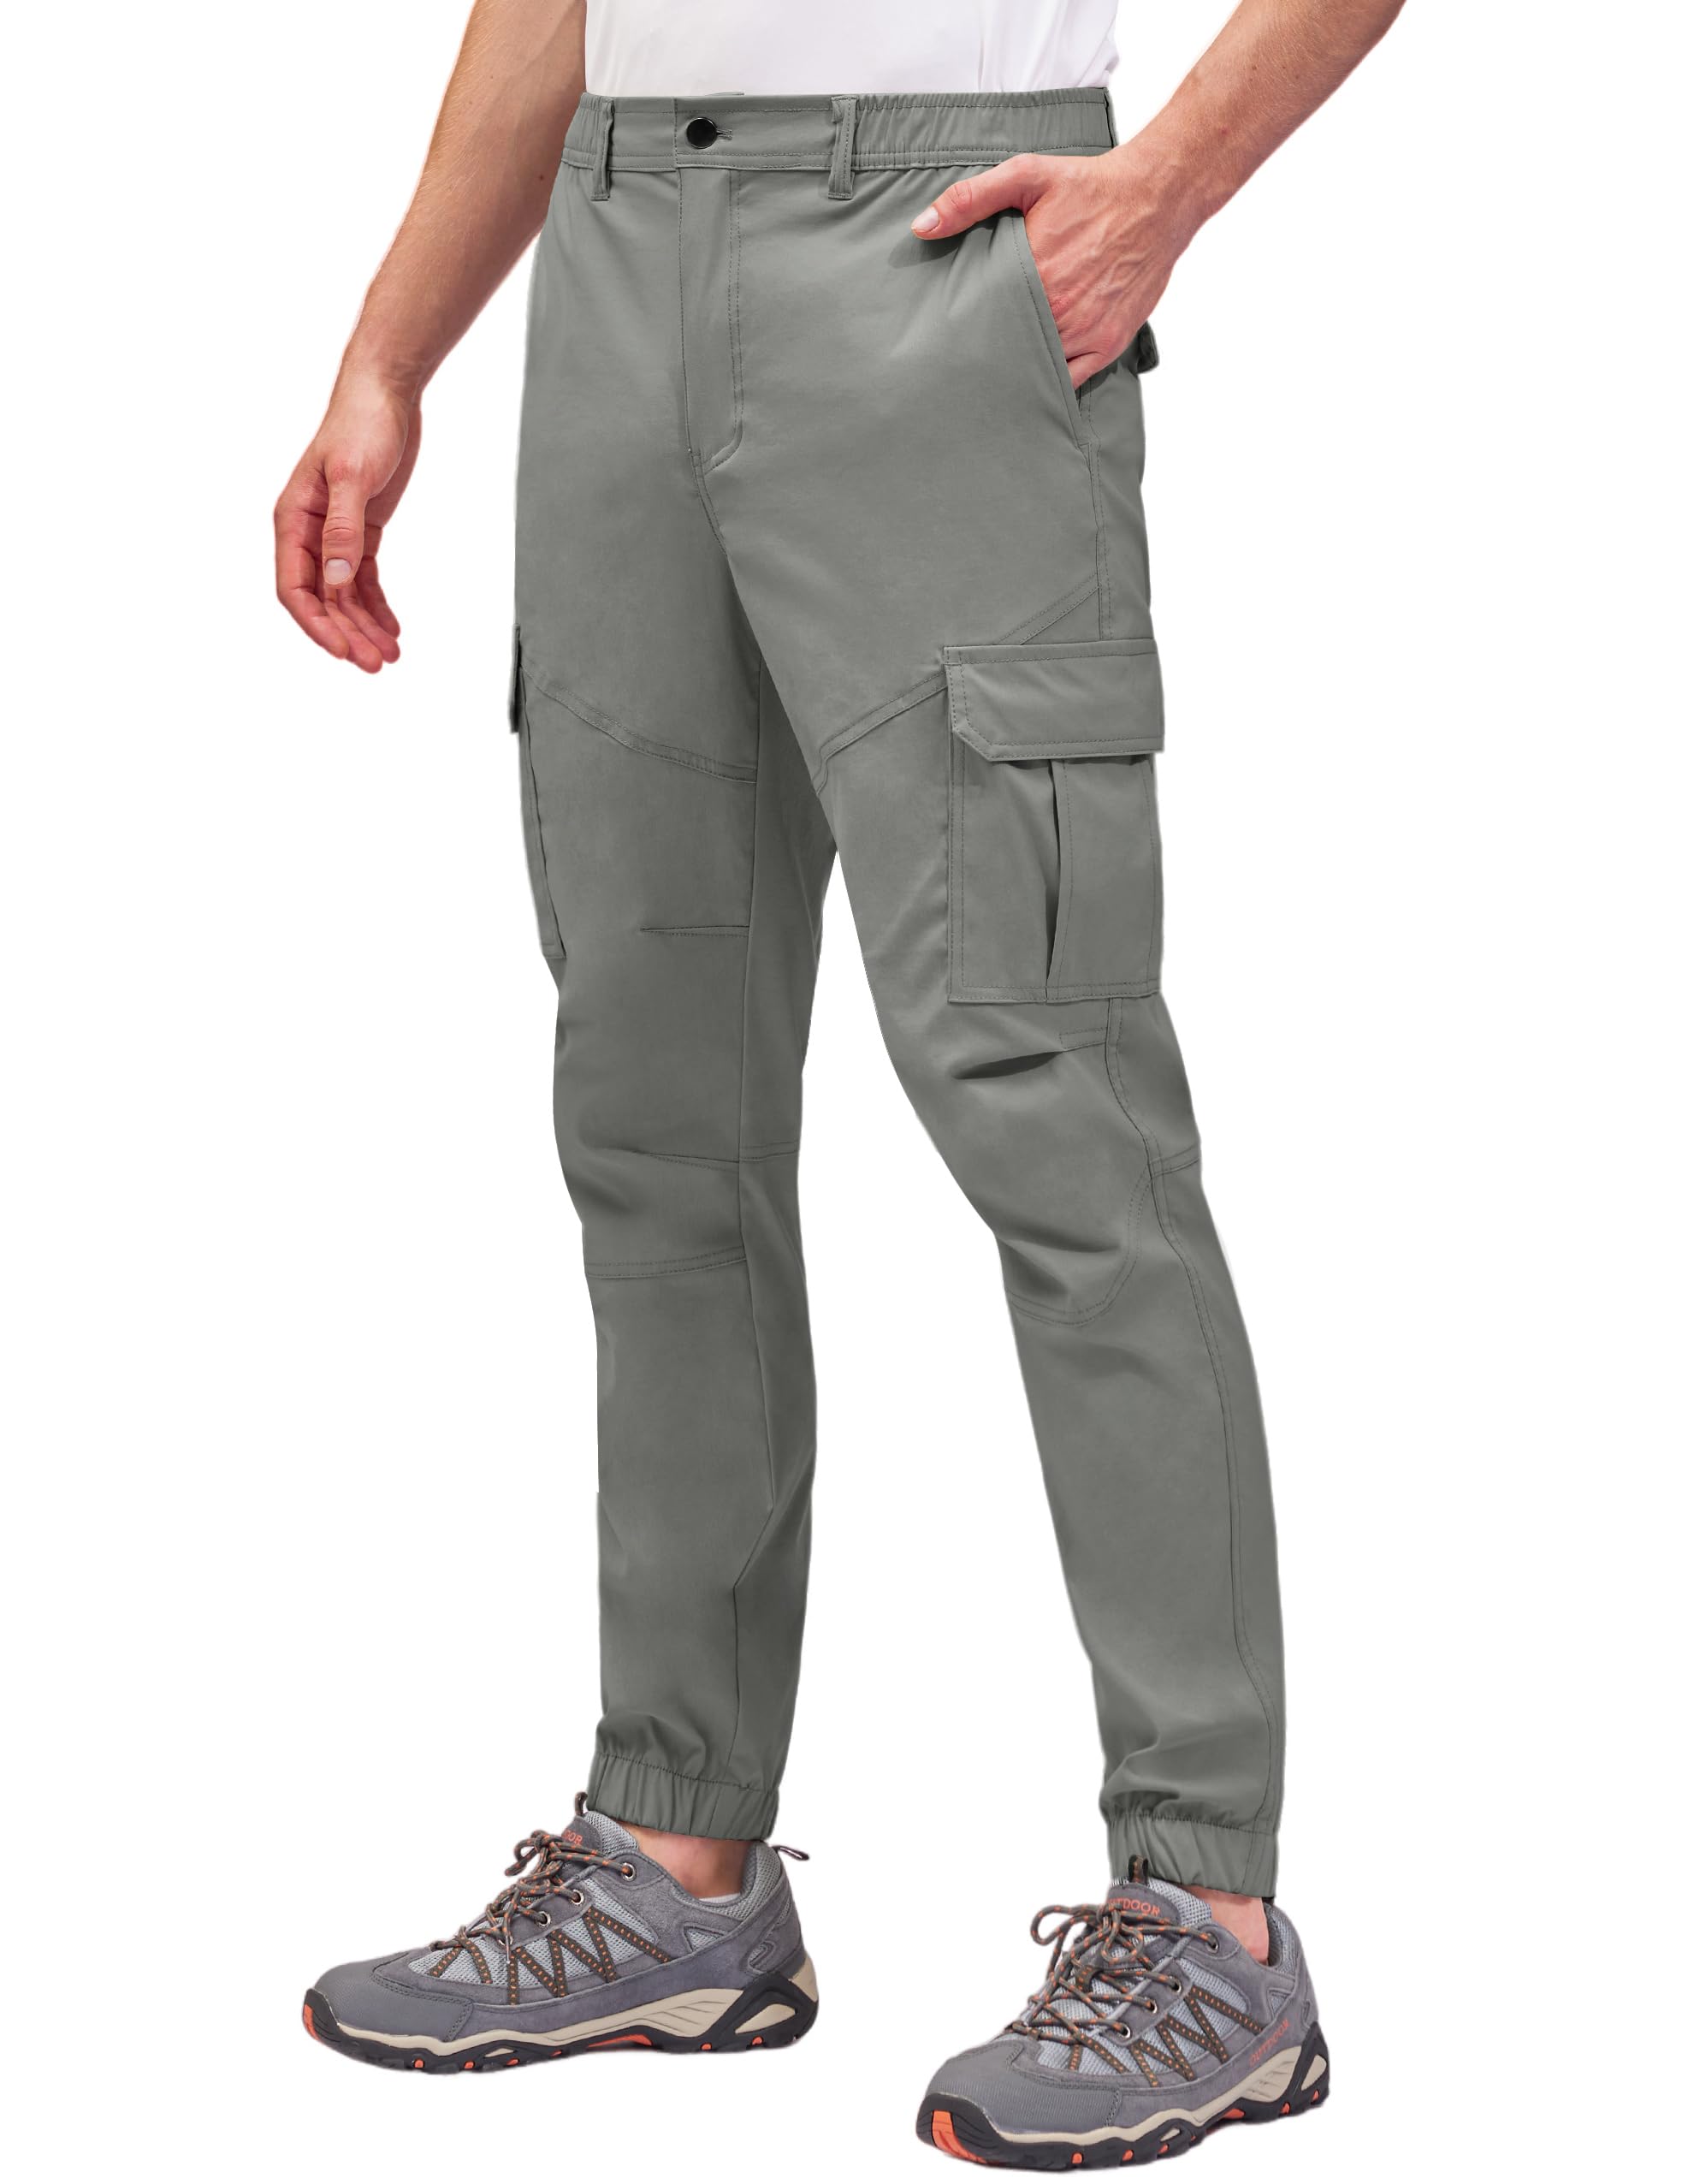 Men's Classic Stretch Golf Pants with Pockets